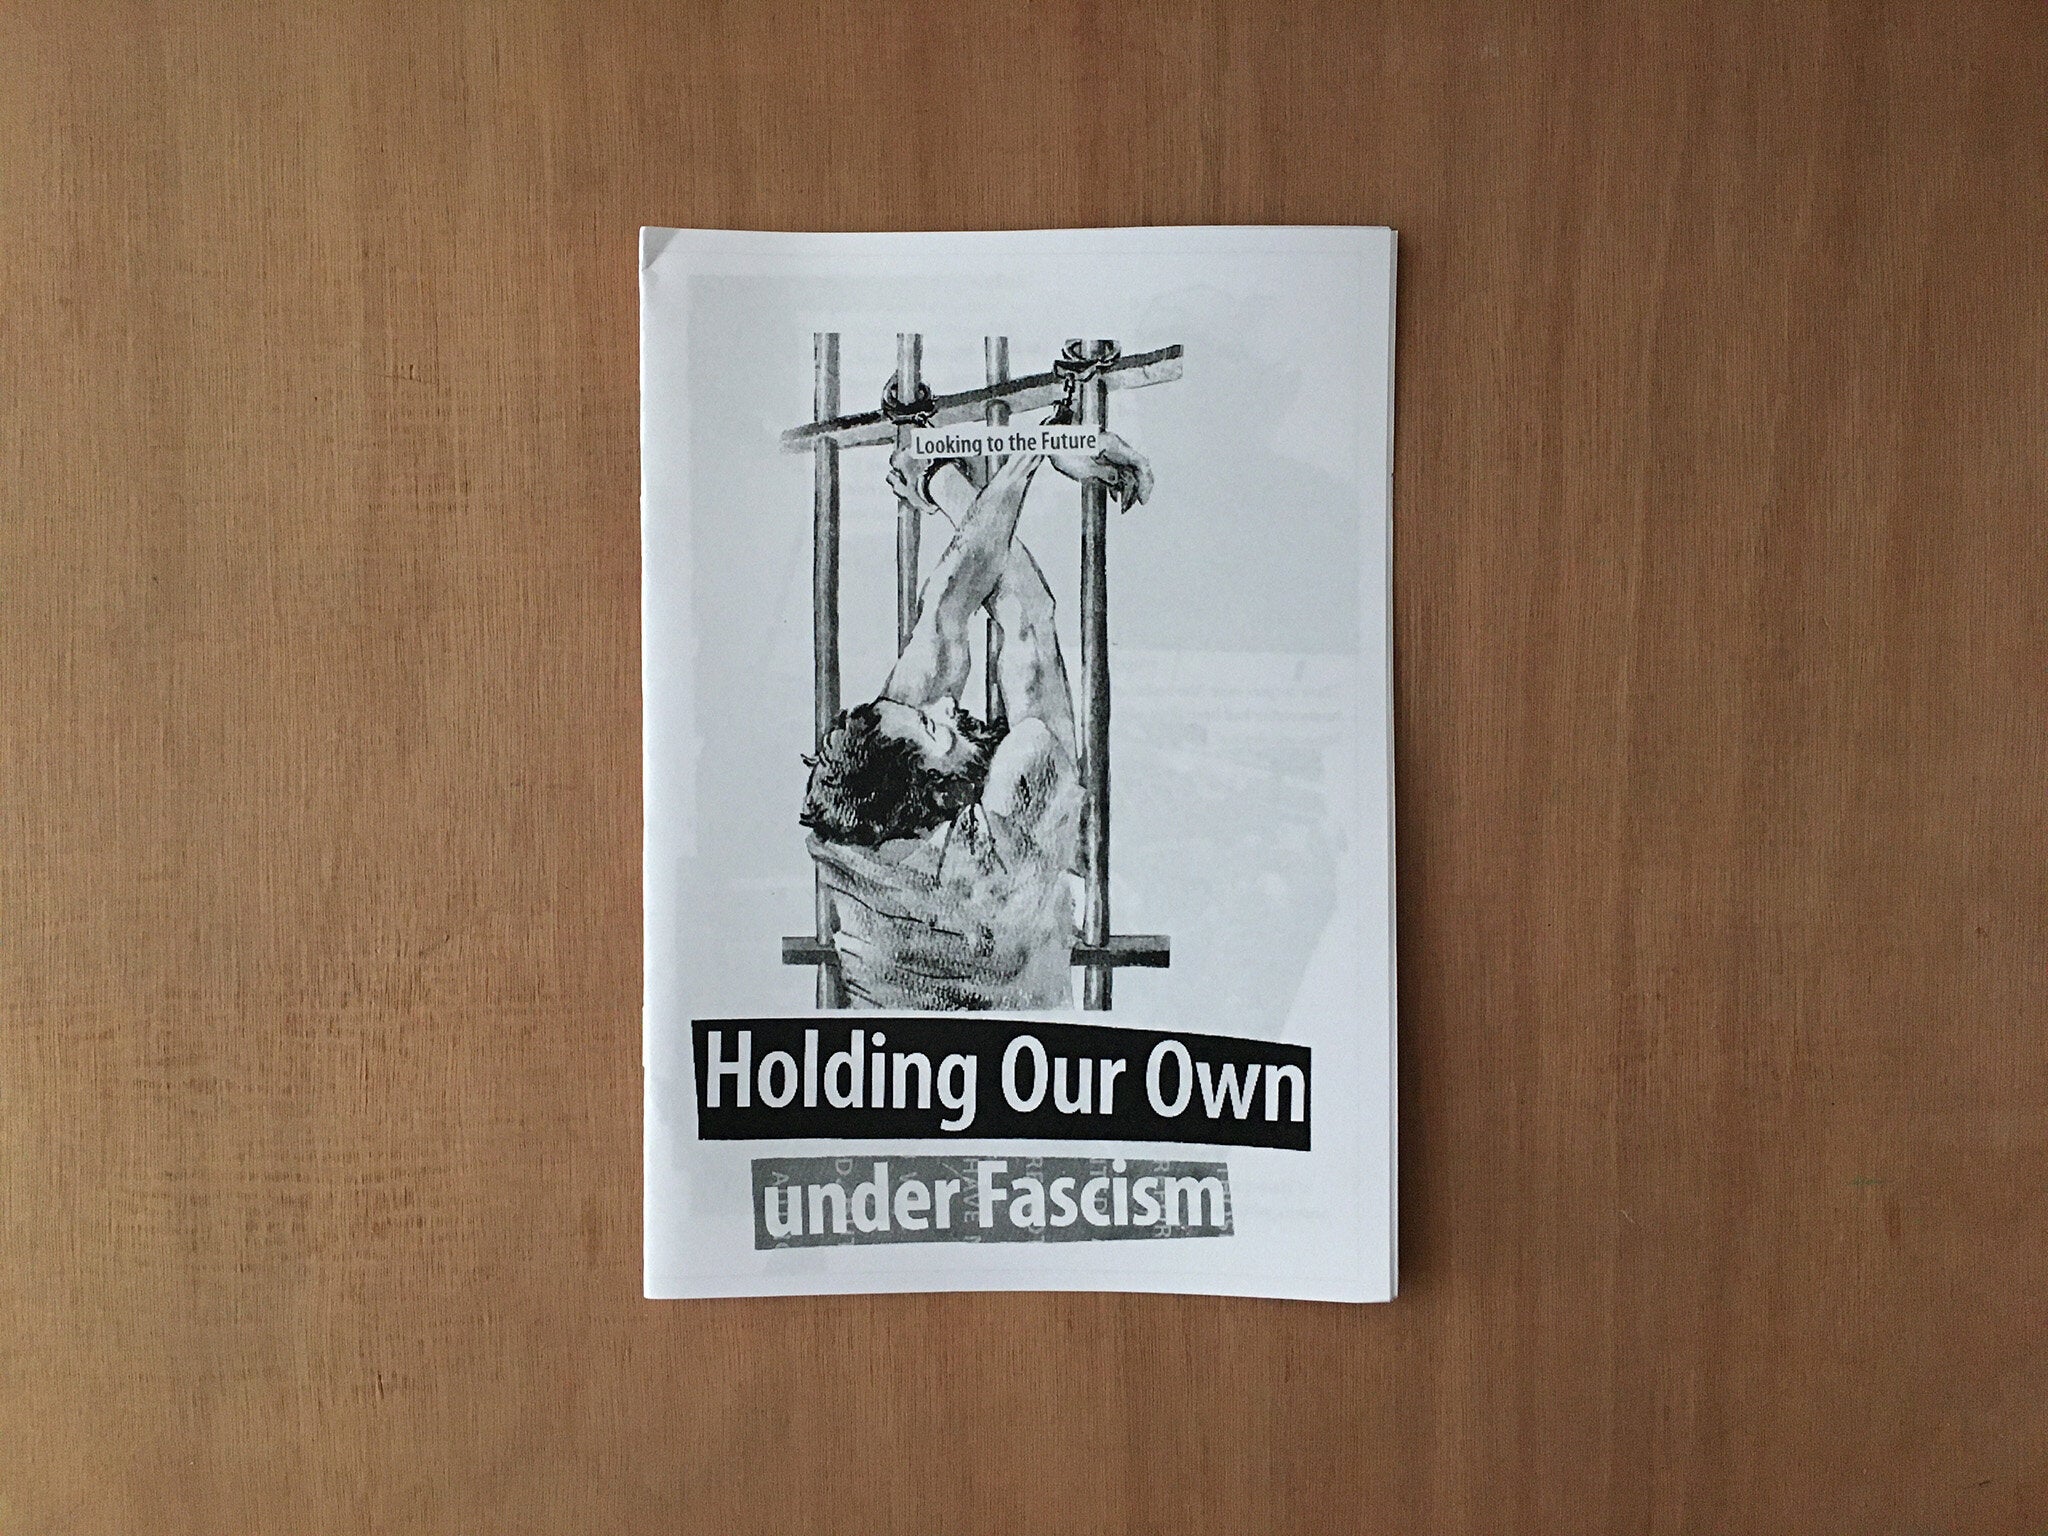 HOLDING OUR OWN UNDER FASCISM by Ethan